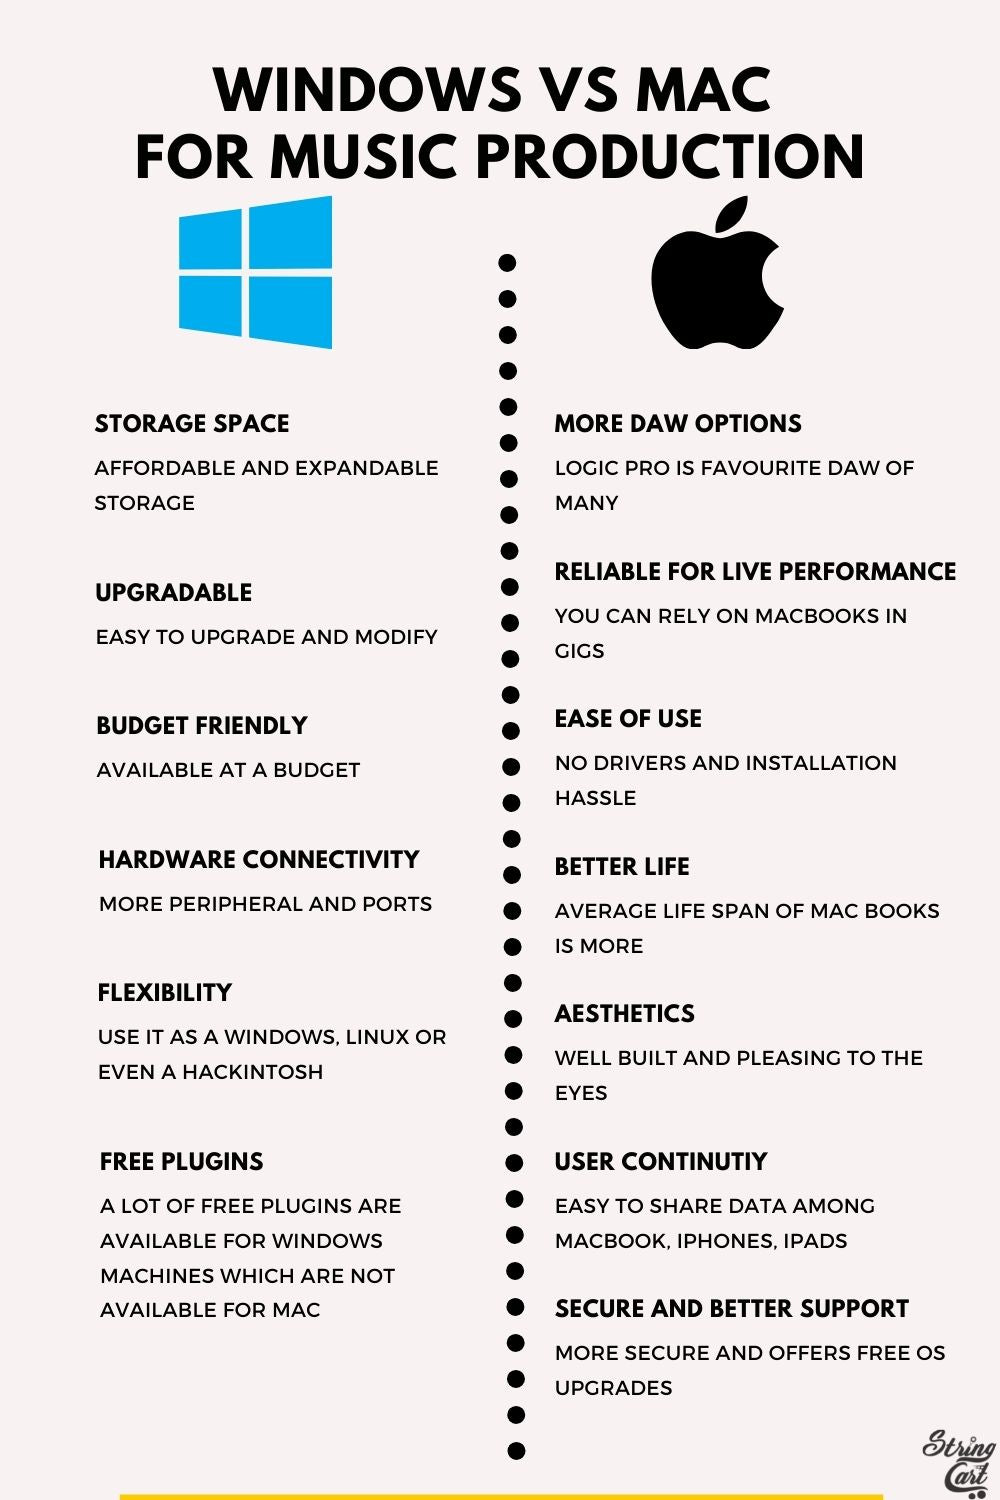 Windows vs Mac for music production - Infographic